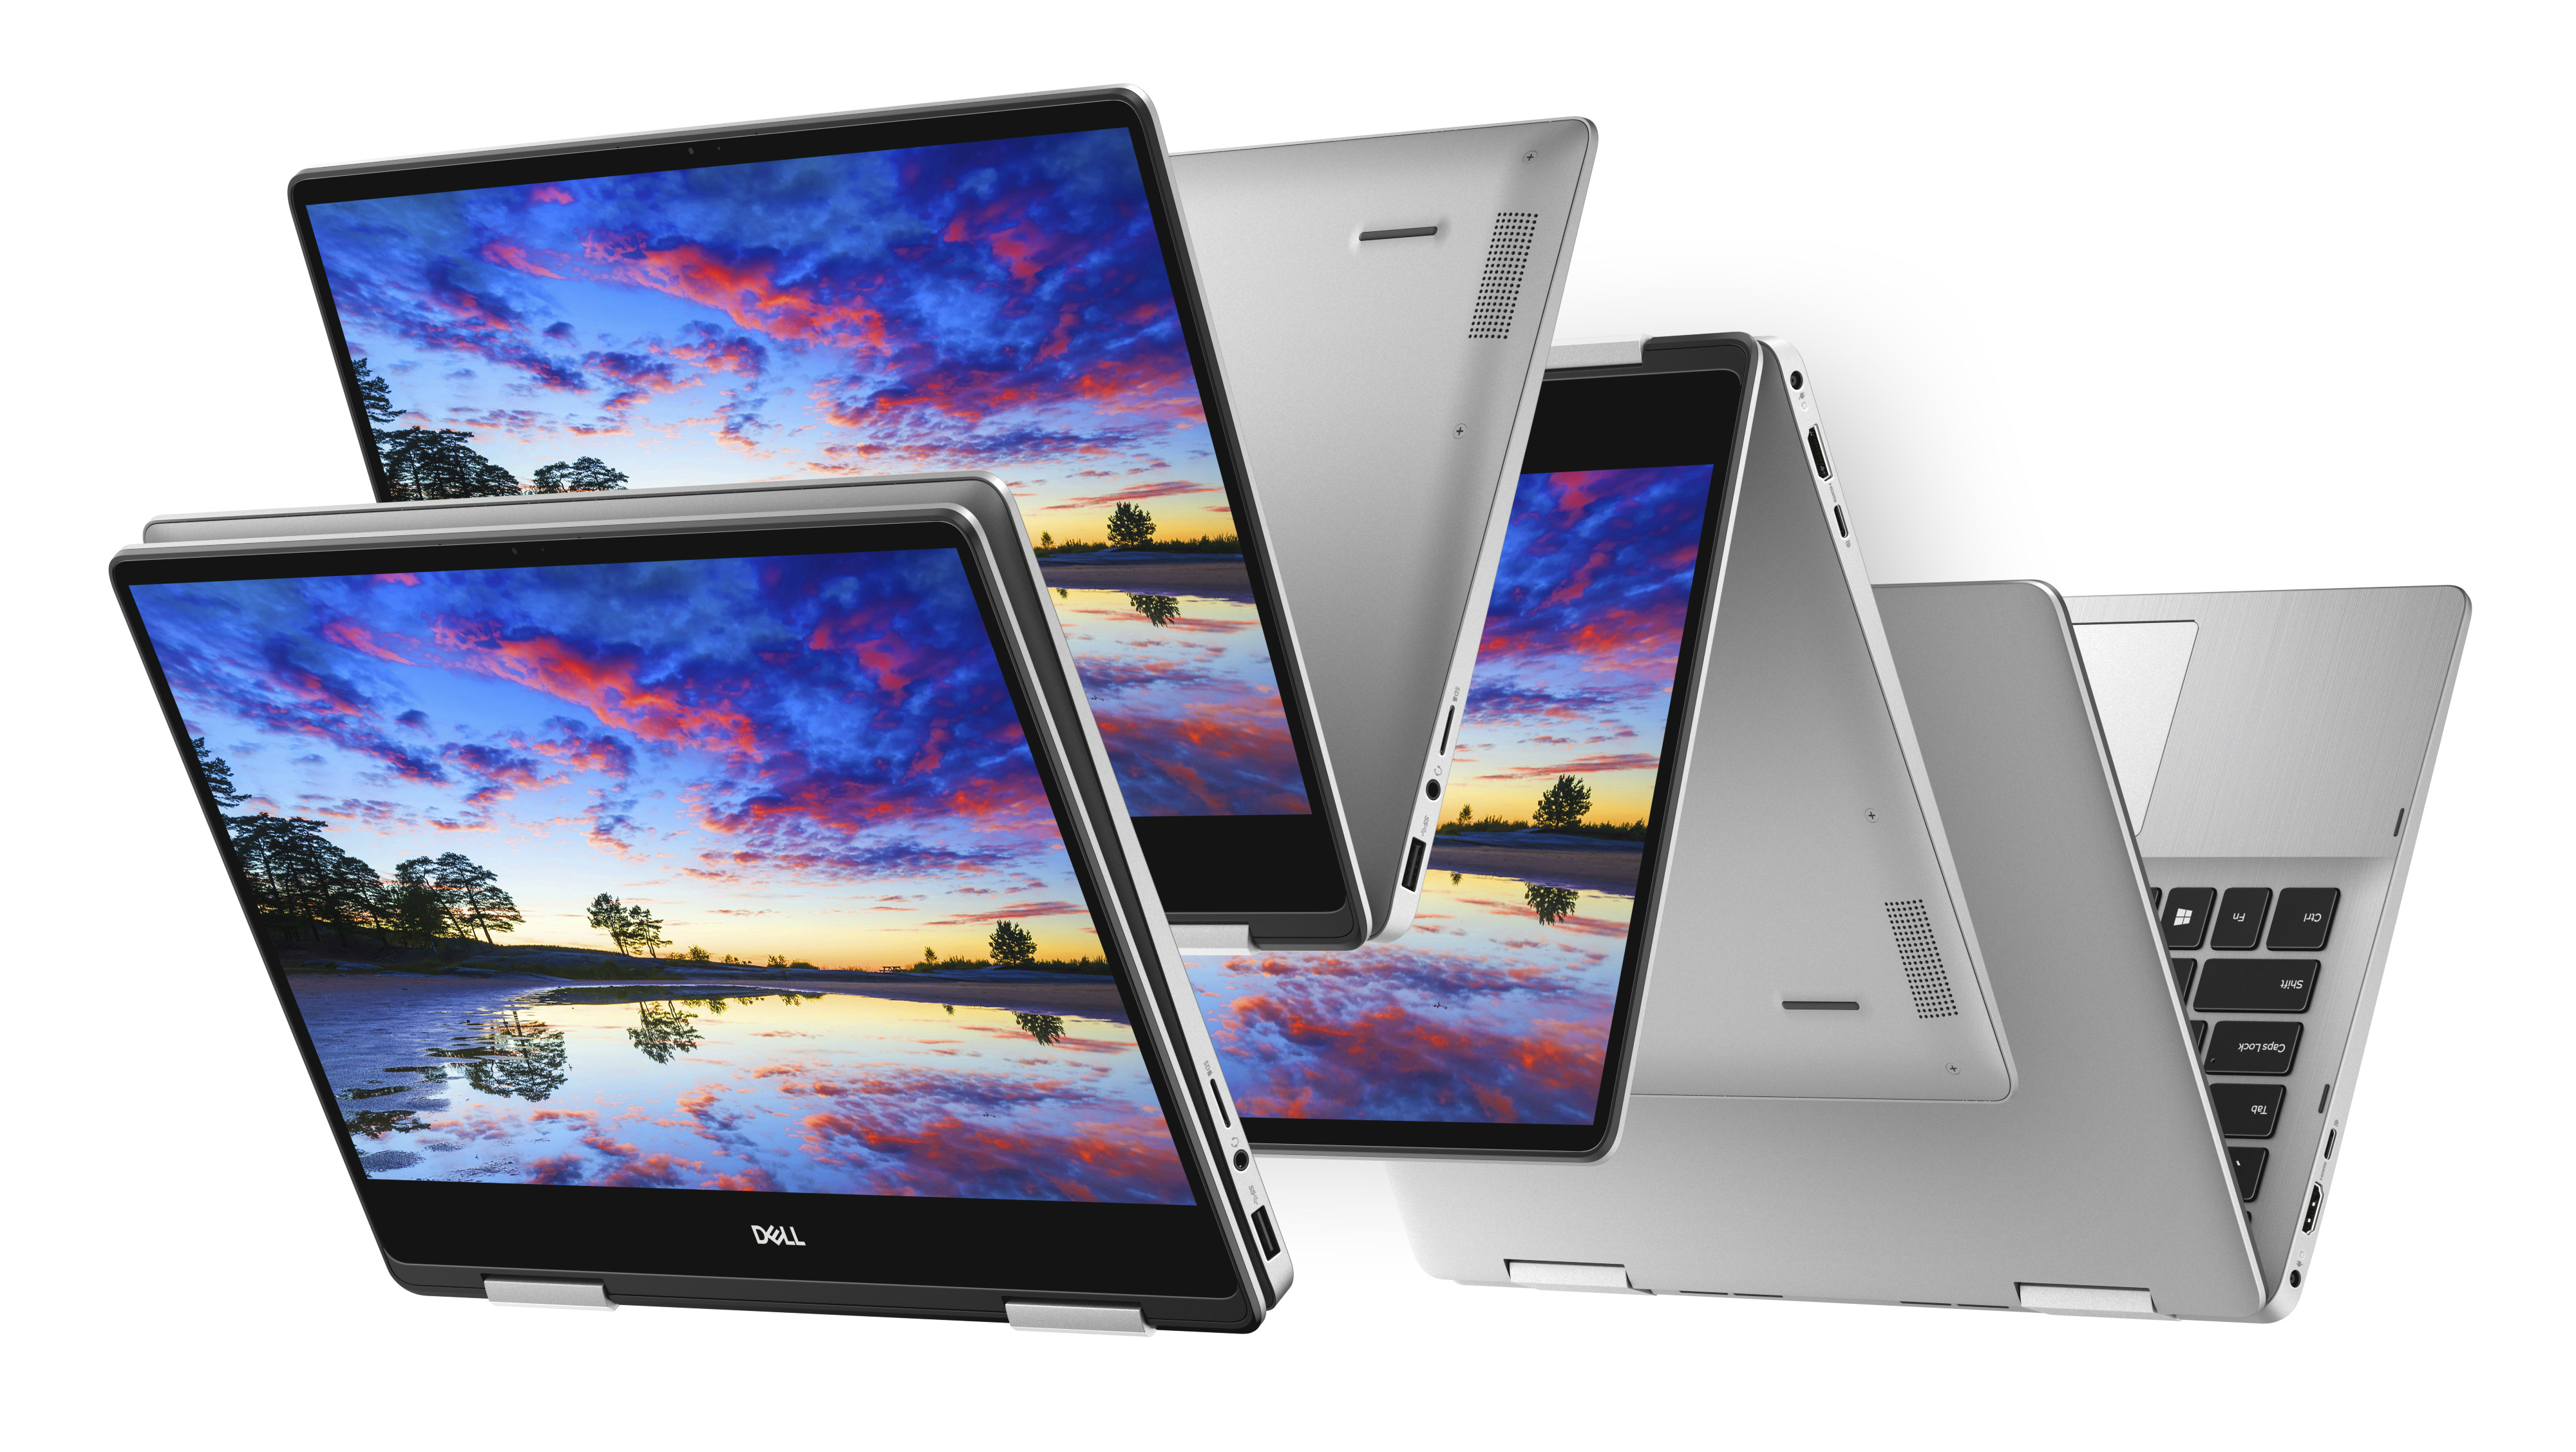 Dell S 18 Inspiron 2 In 1 Laptops Bring More Flagship Features To The Mainstream Techradar